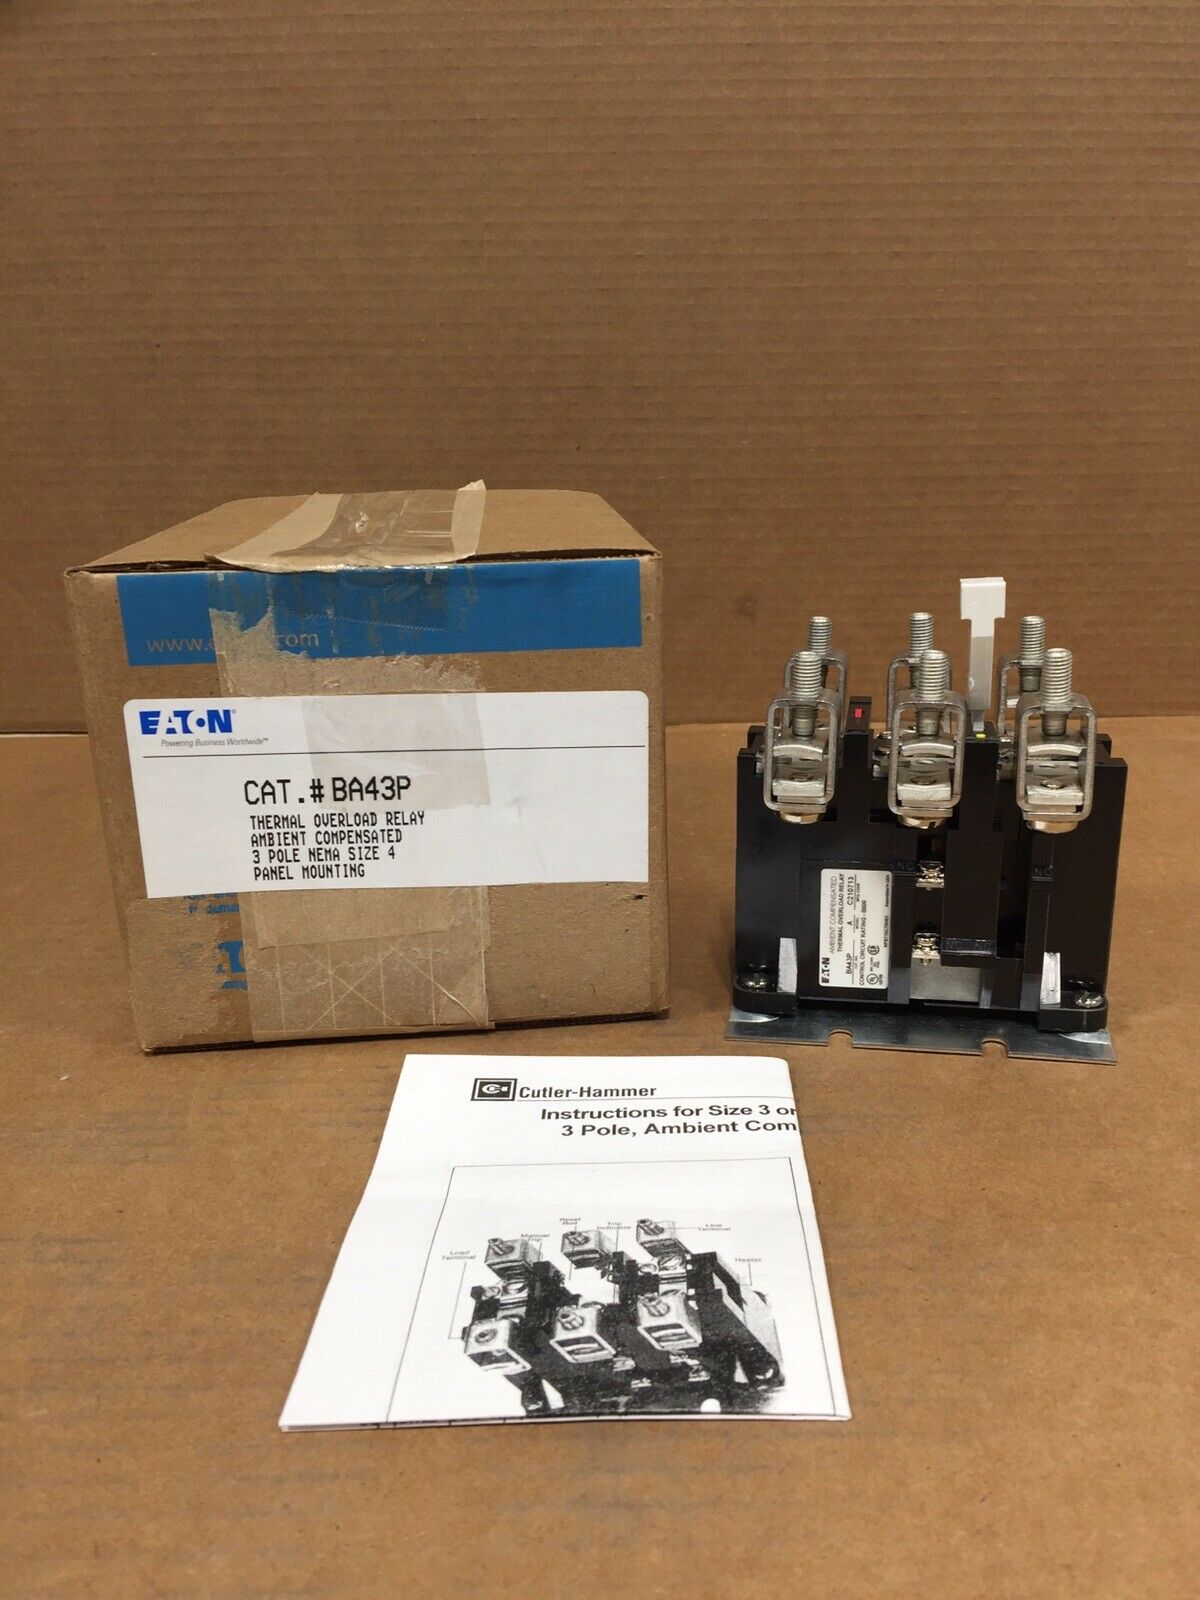 HOUSTON STOCK NEW EATON BA43P OVERLOAD RELAY A200 FRFEE 2 DAY AIR BUY NOW ONLY